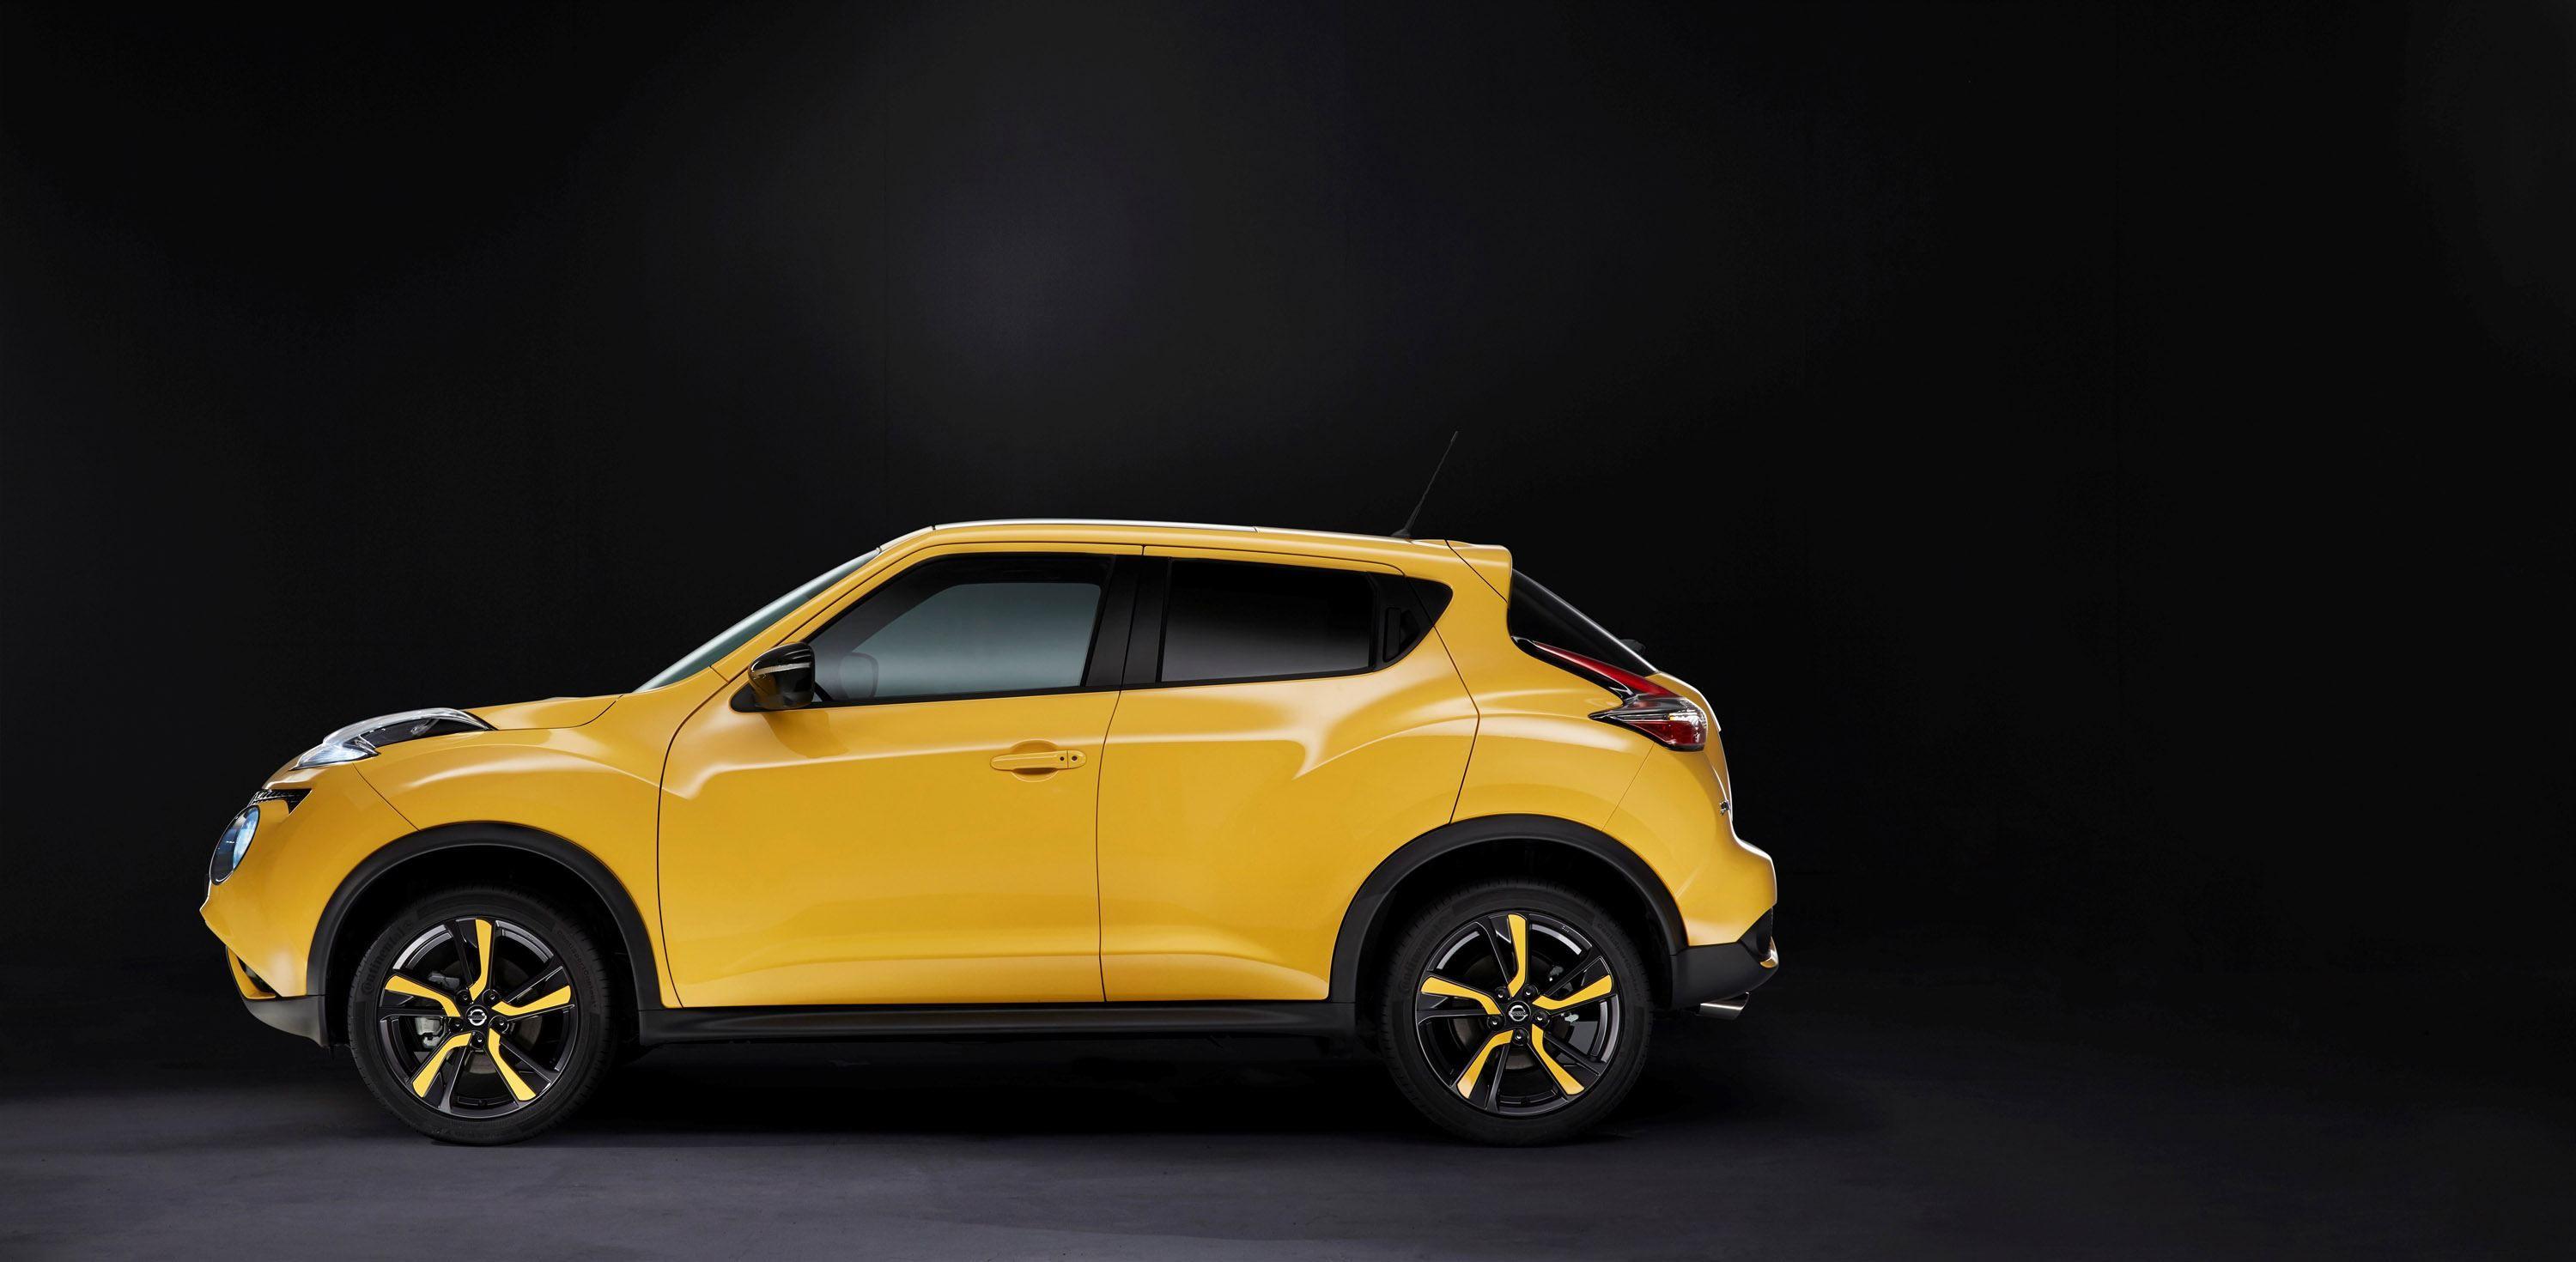 Nissan Juke Color Studio 2015 photo 111843 picture at high resolution